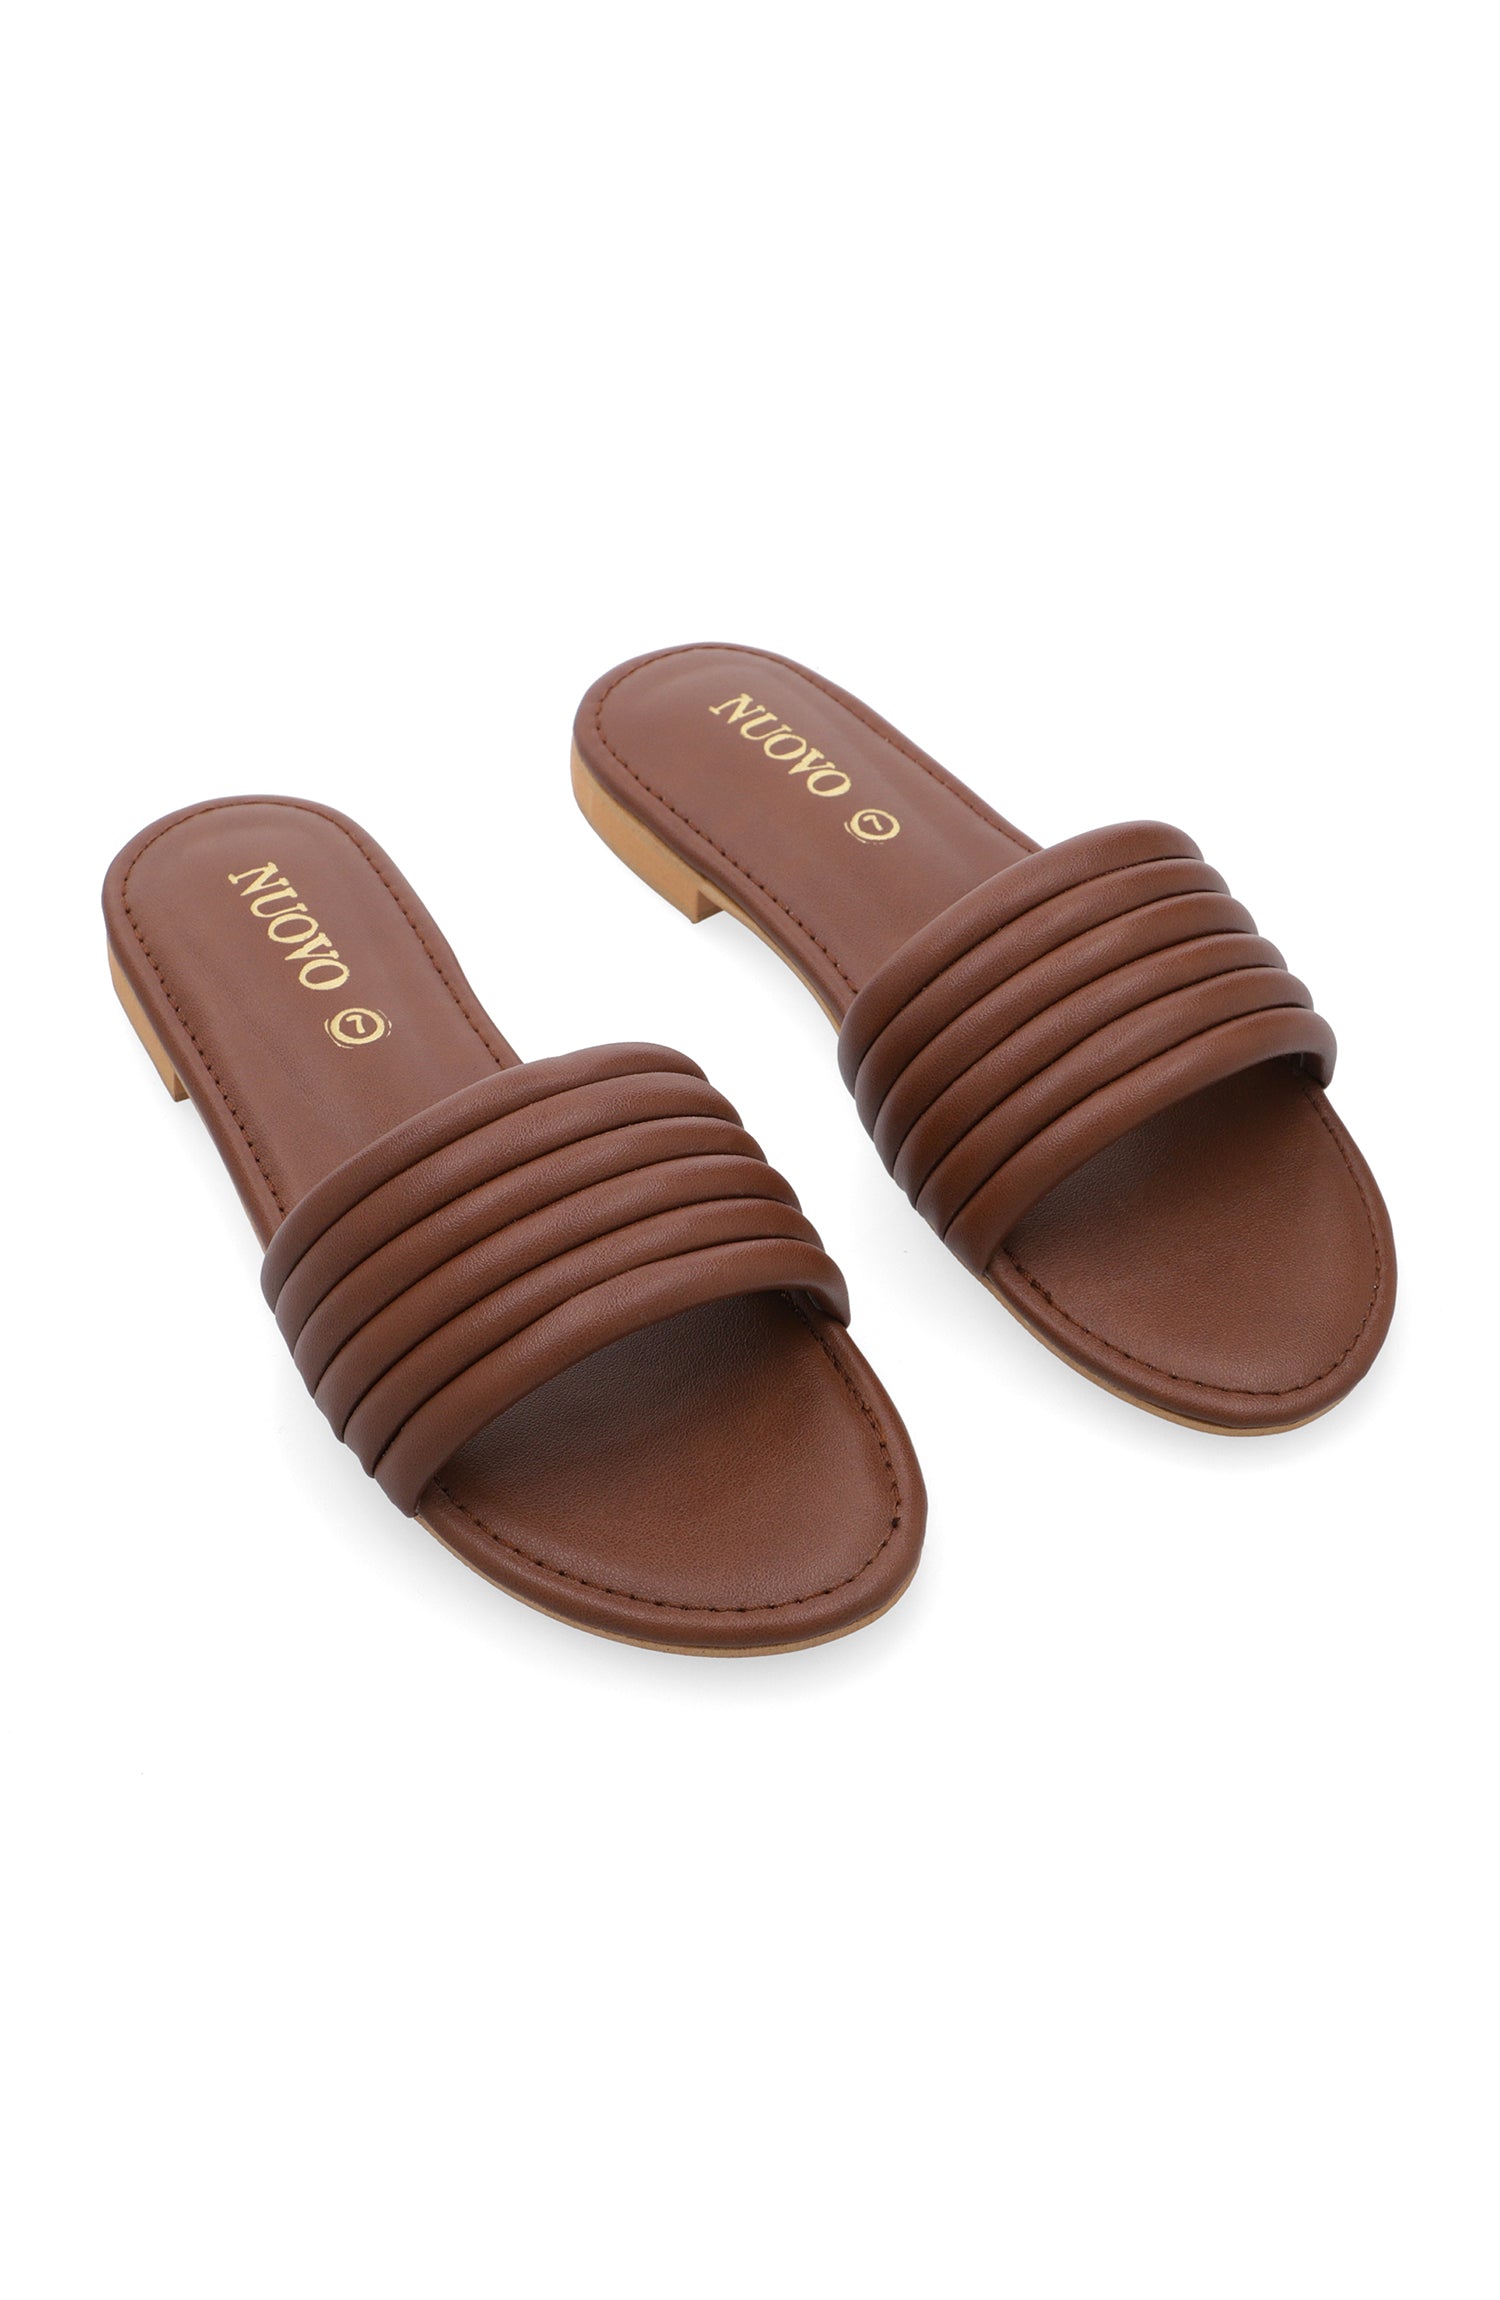 Women Slippers -  BROWN (ORFS-84 BROWN)